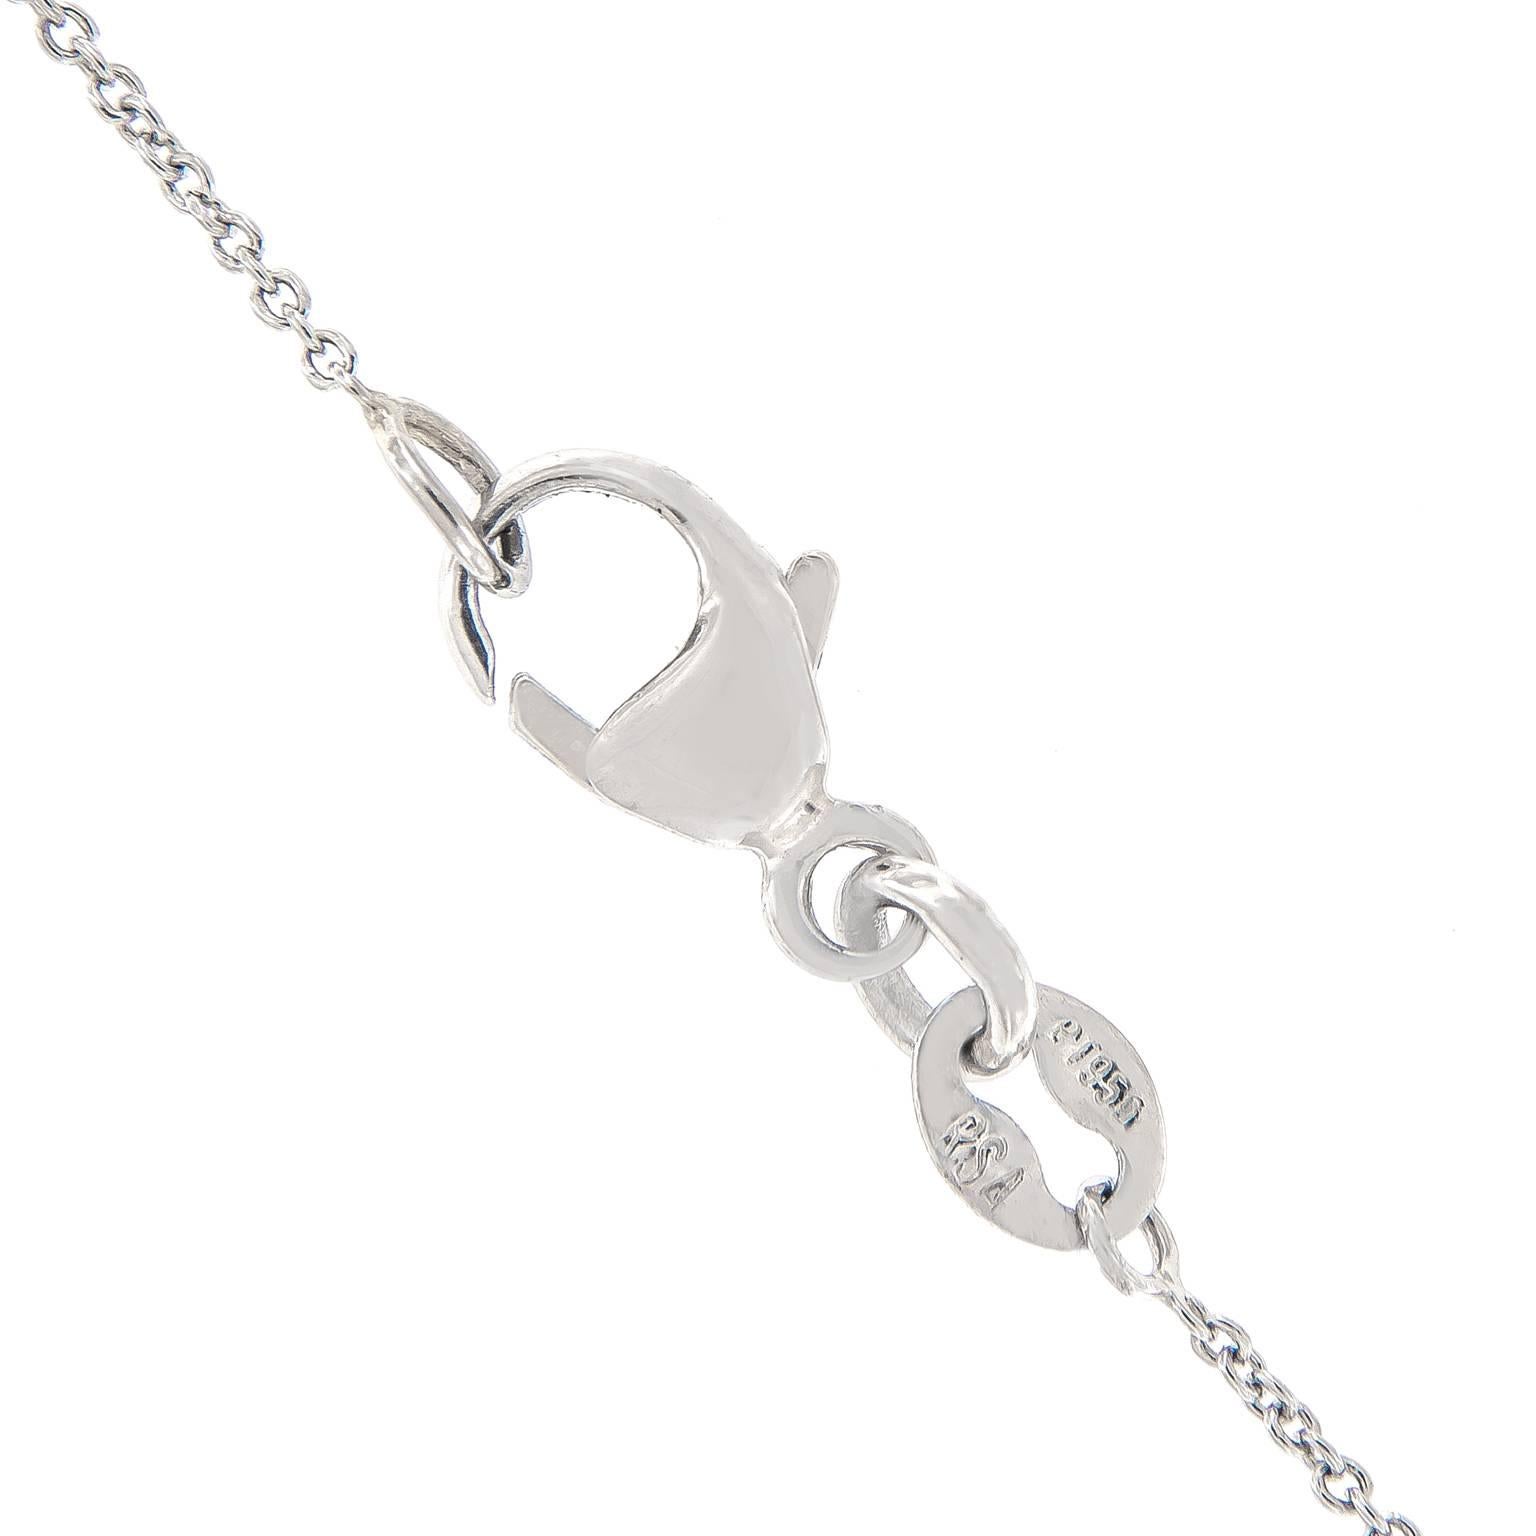 Classic platinum cross pendant features six beautiful square baguette diamonds. Pendant hangs from a split bail on a 16 in long platinum chain. Pendant is expertly hand-crafted by Joseph Campanelli.
Cross 8.5 mm x 12 mm. Total pendant Length is 16